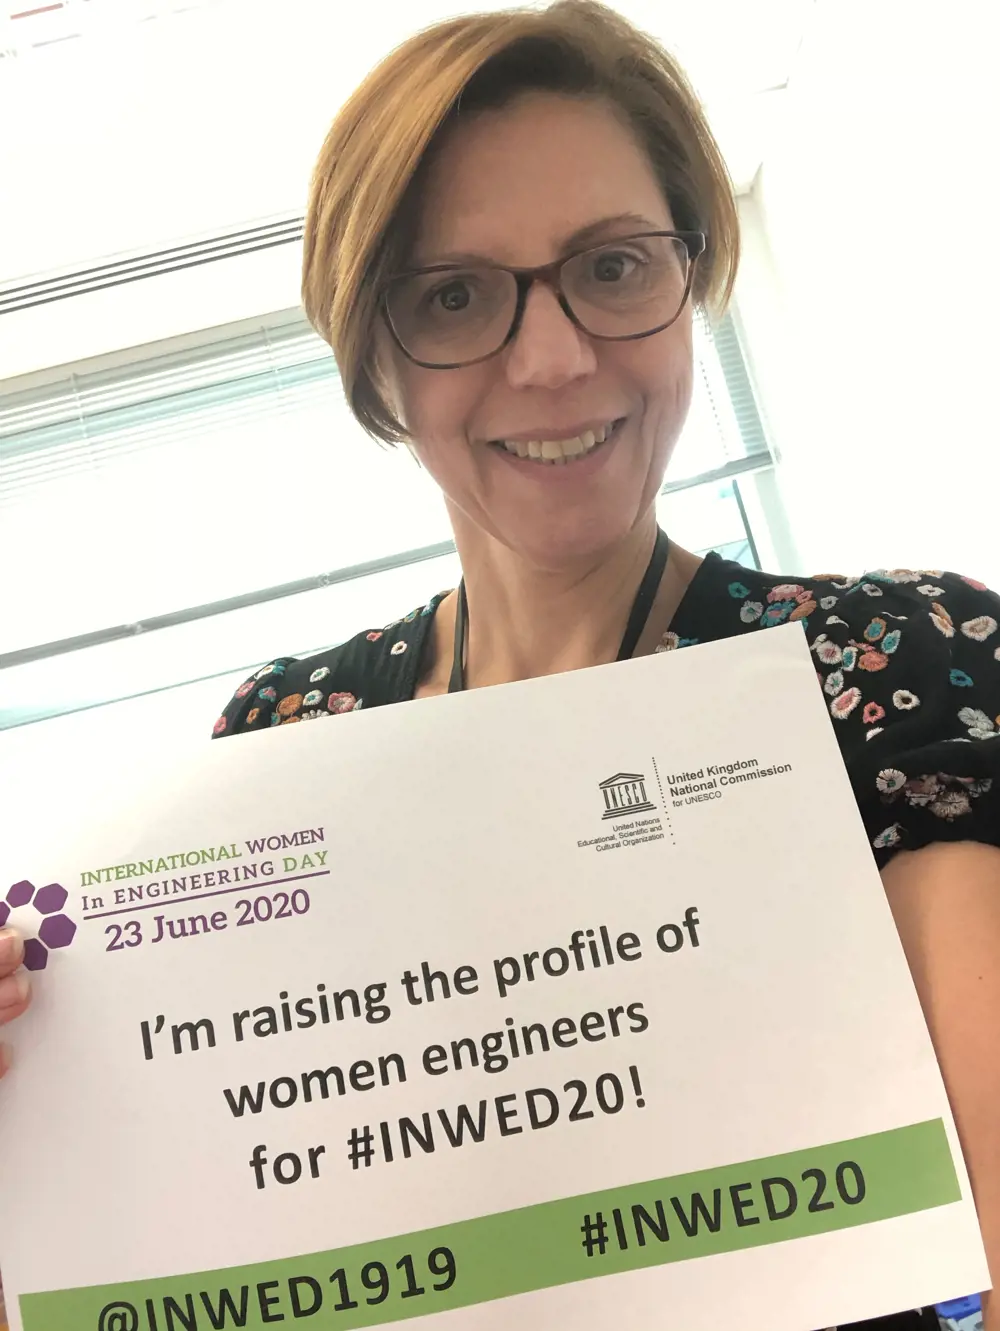 Dr Luisa Freitas dos Santos holding a paper that says 'I'm raising the profile of women engineers for #INWED20!'